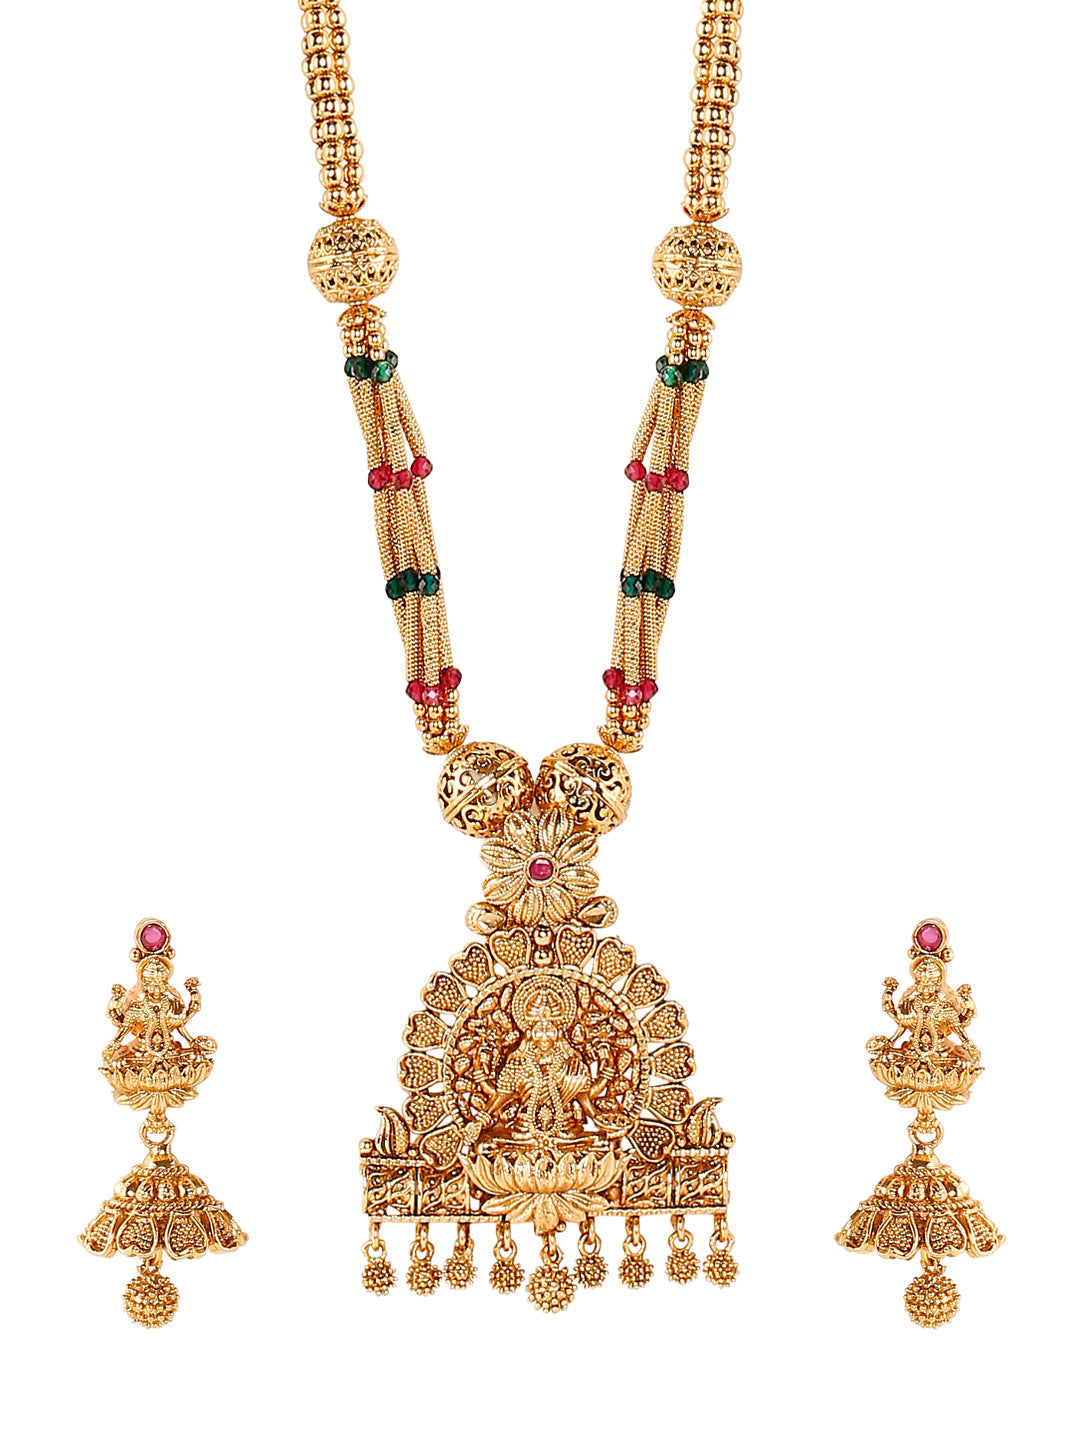 Handcrafted 18K Antique Gold Plated Godess Lakshmi Temple Jewellery Necklace With Matching Earring For Women (SJ_2800)